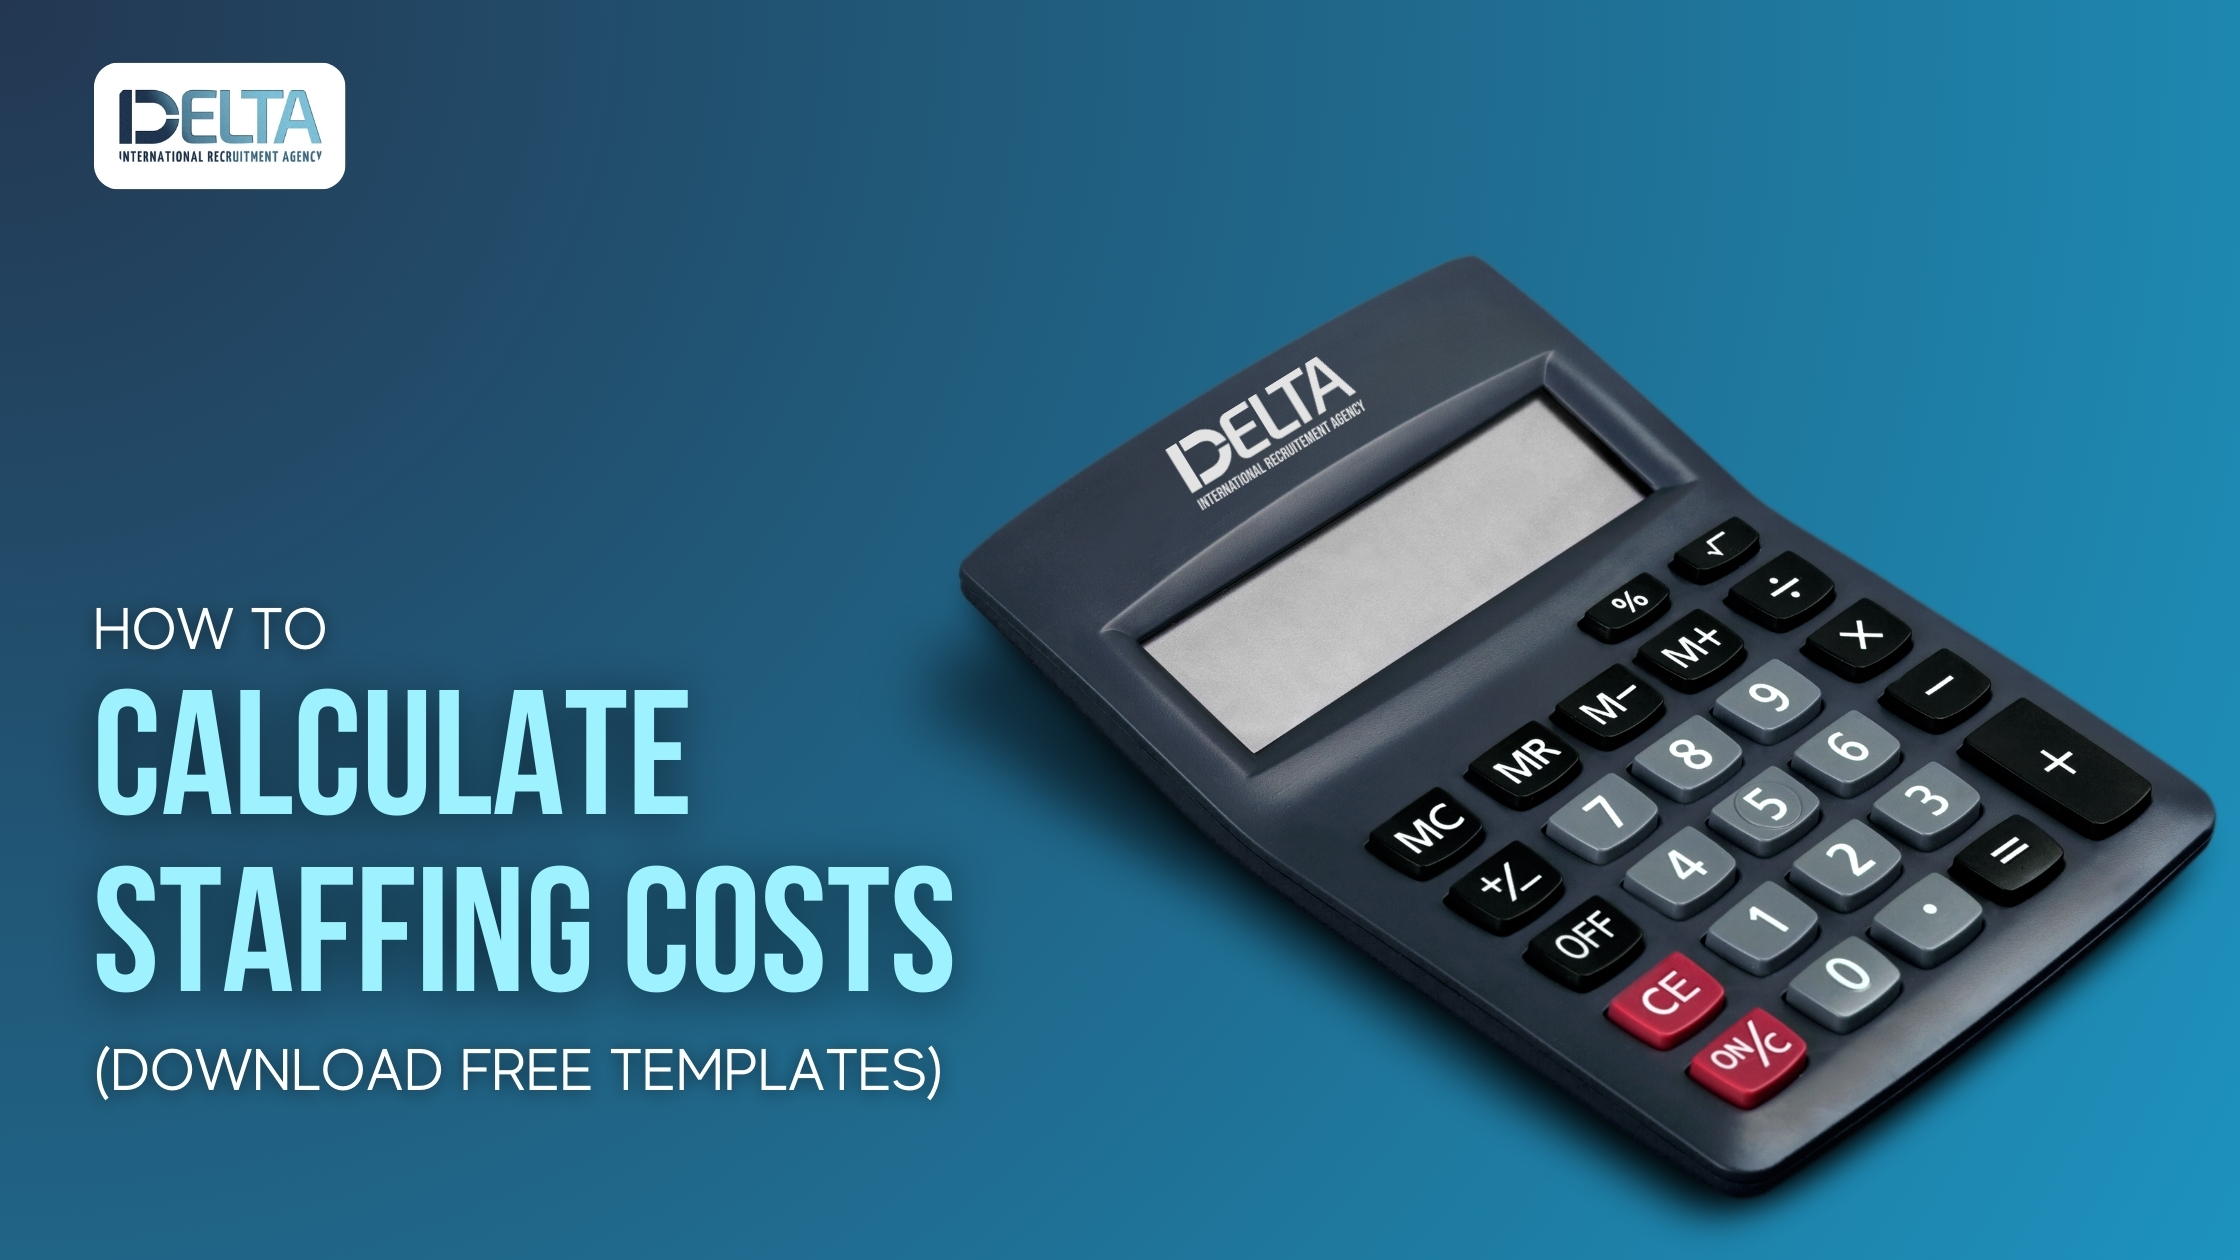 How to Calculate Staffing Costs (Download Free Templates)